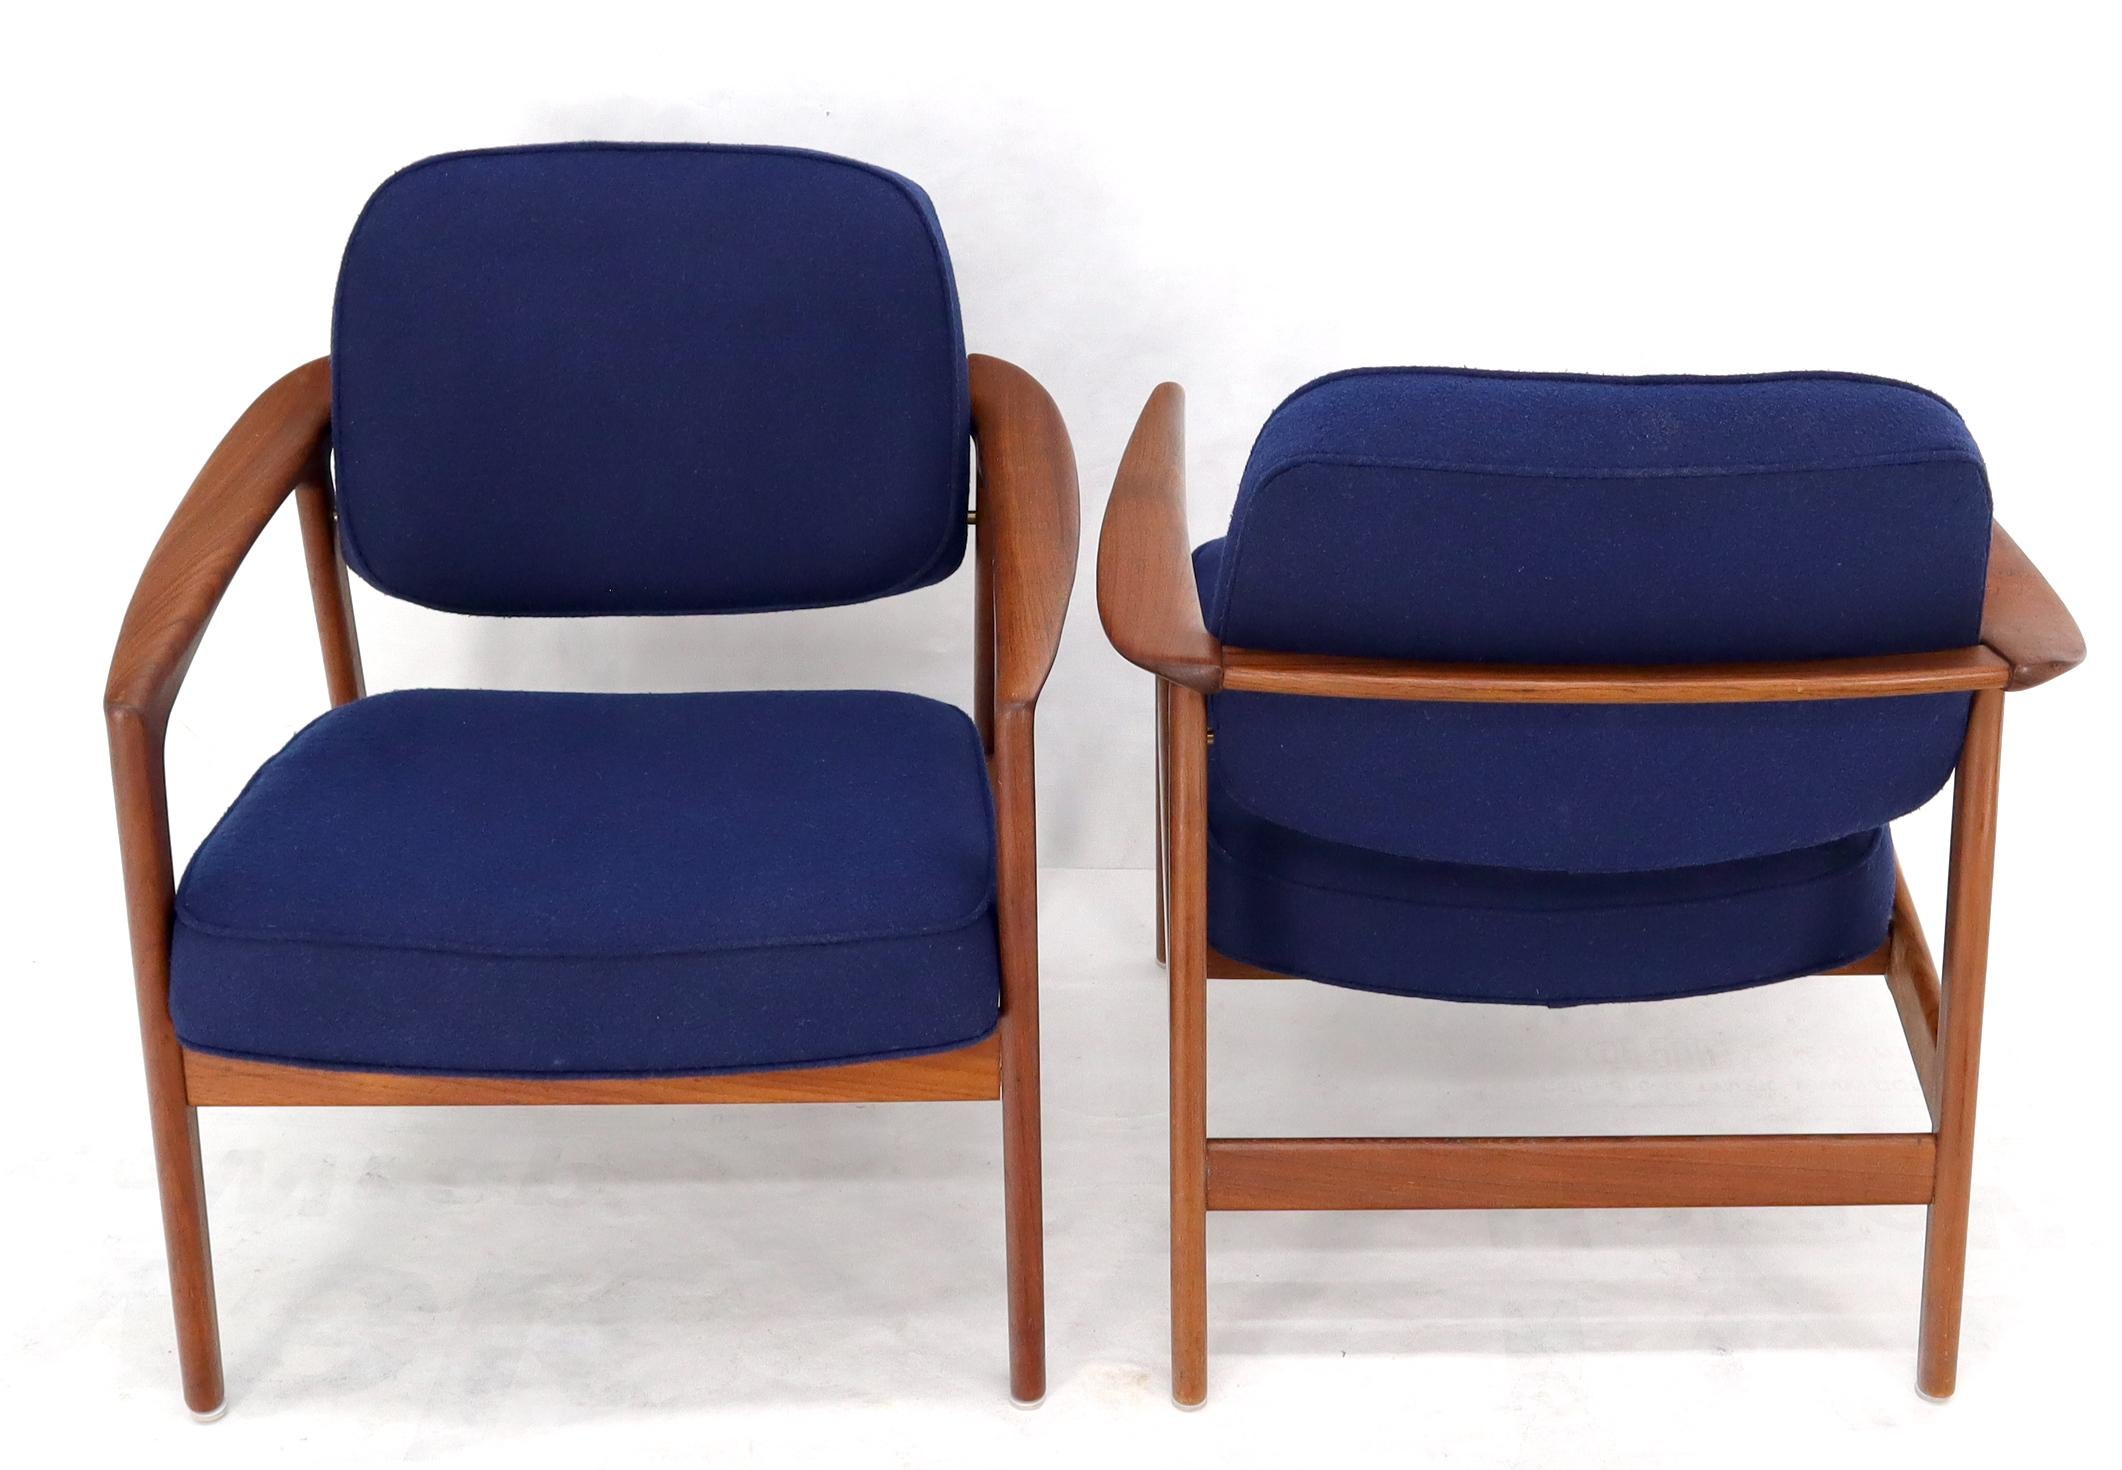 Lacquered Pair of New Blue Upholstery Teak Danish Mid-Century Modern Arm Lounge Chairs For Sale